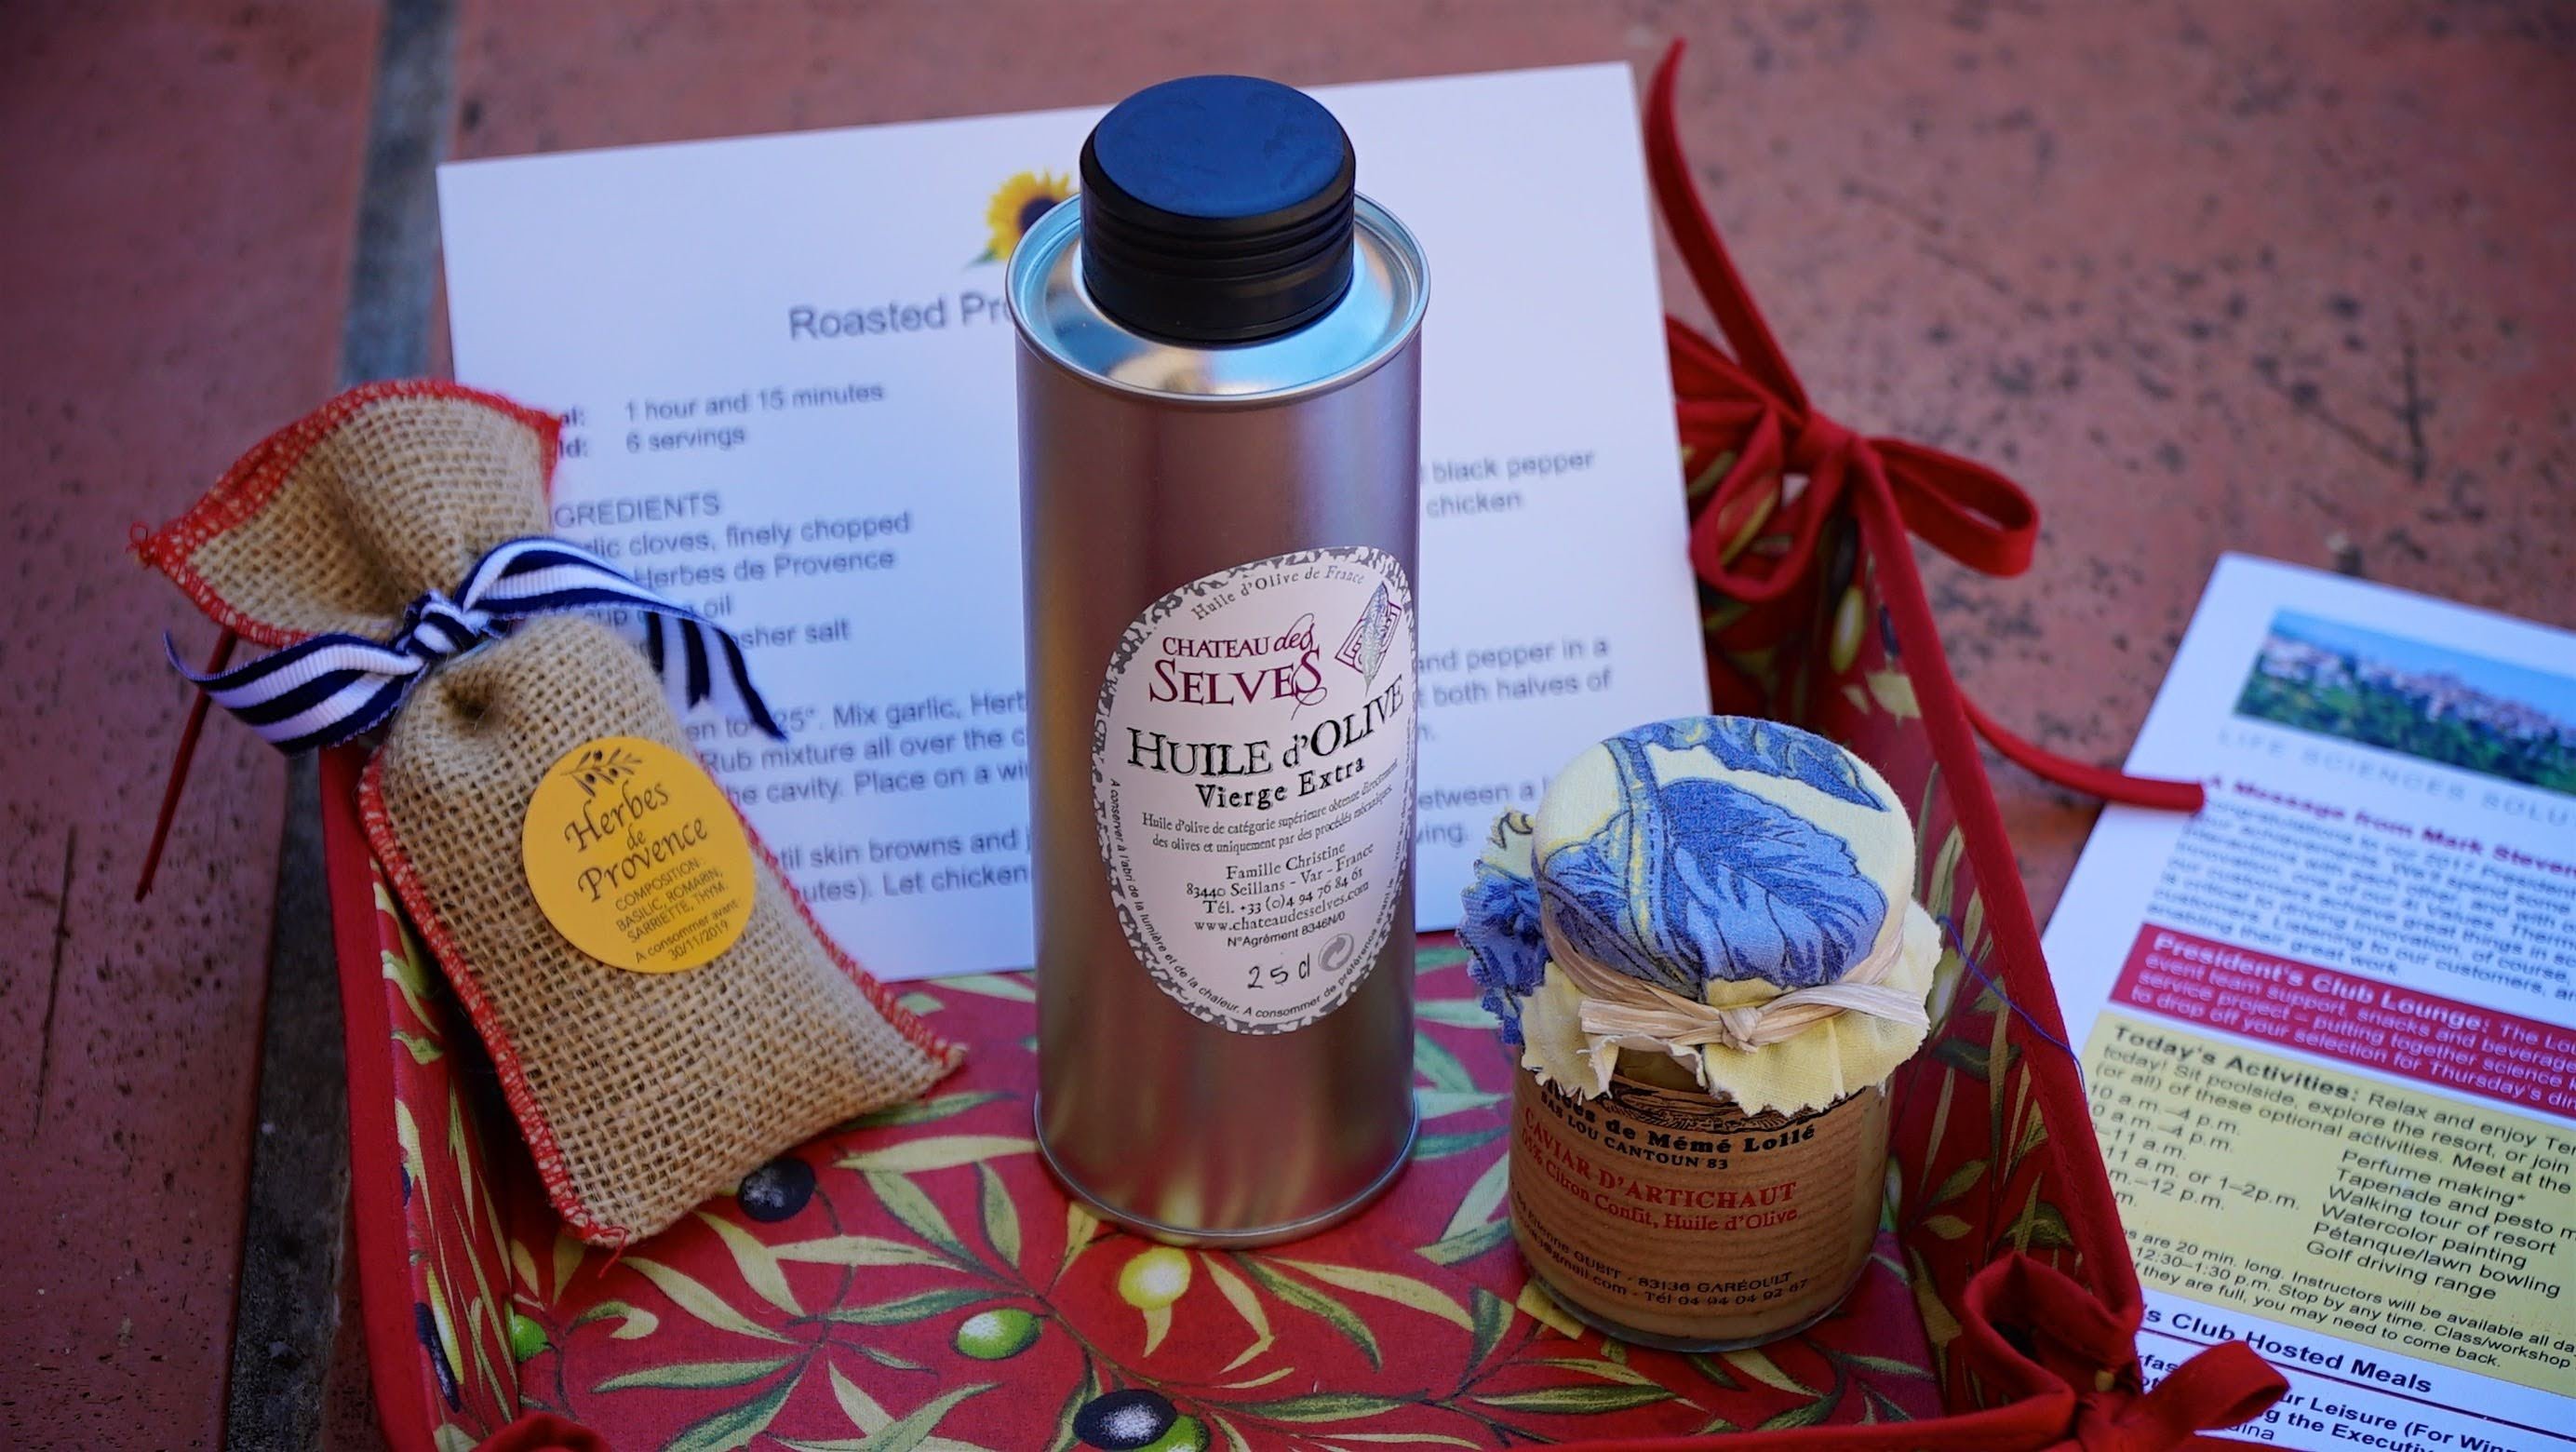 examples of local gifts for sales incentive trip, including olive oil and herbs from Mallorca